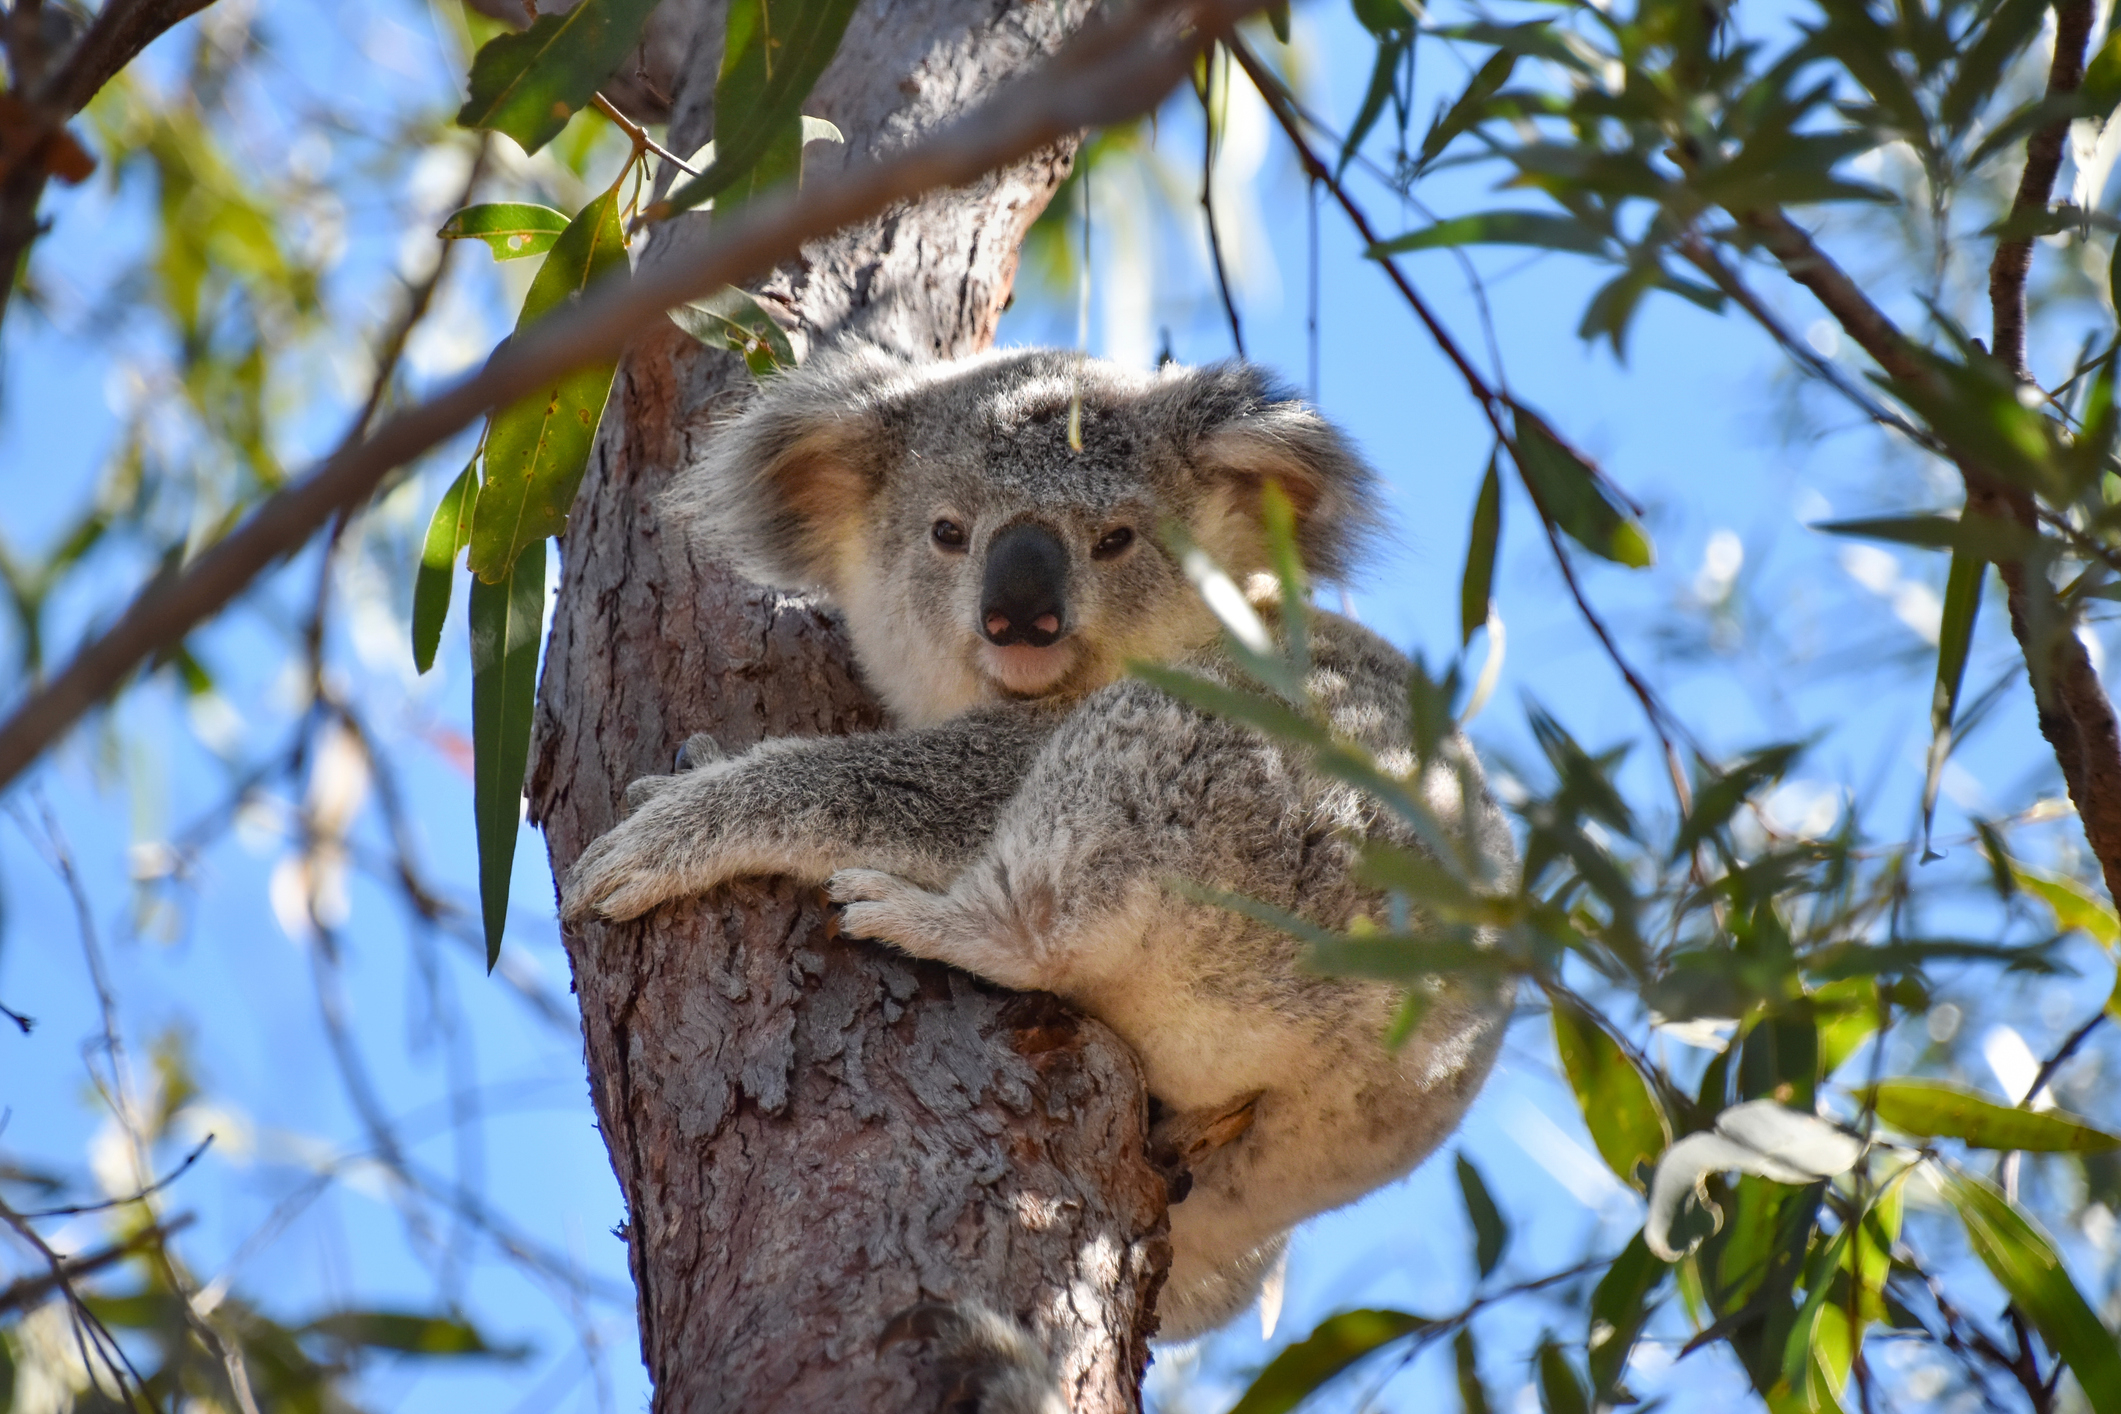 A koala is perched comfortably on a branch in a tree, surrounded by green leaves against a clear blue sky